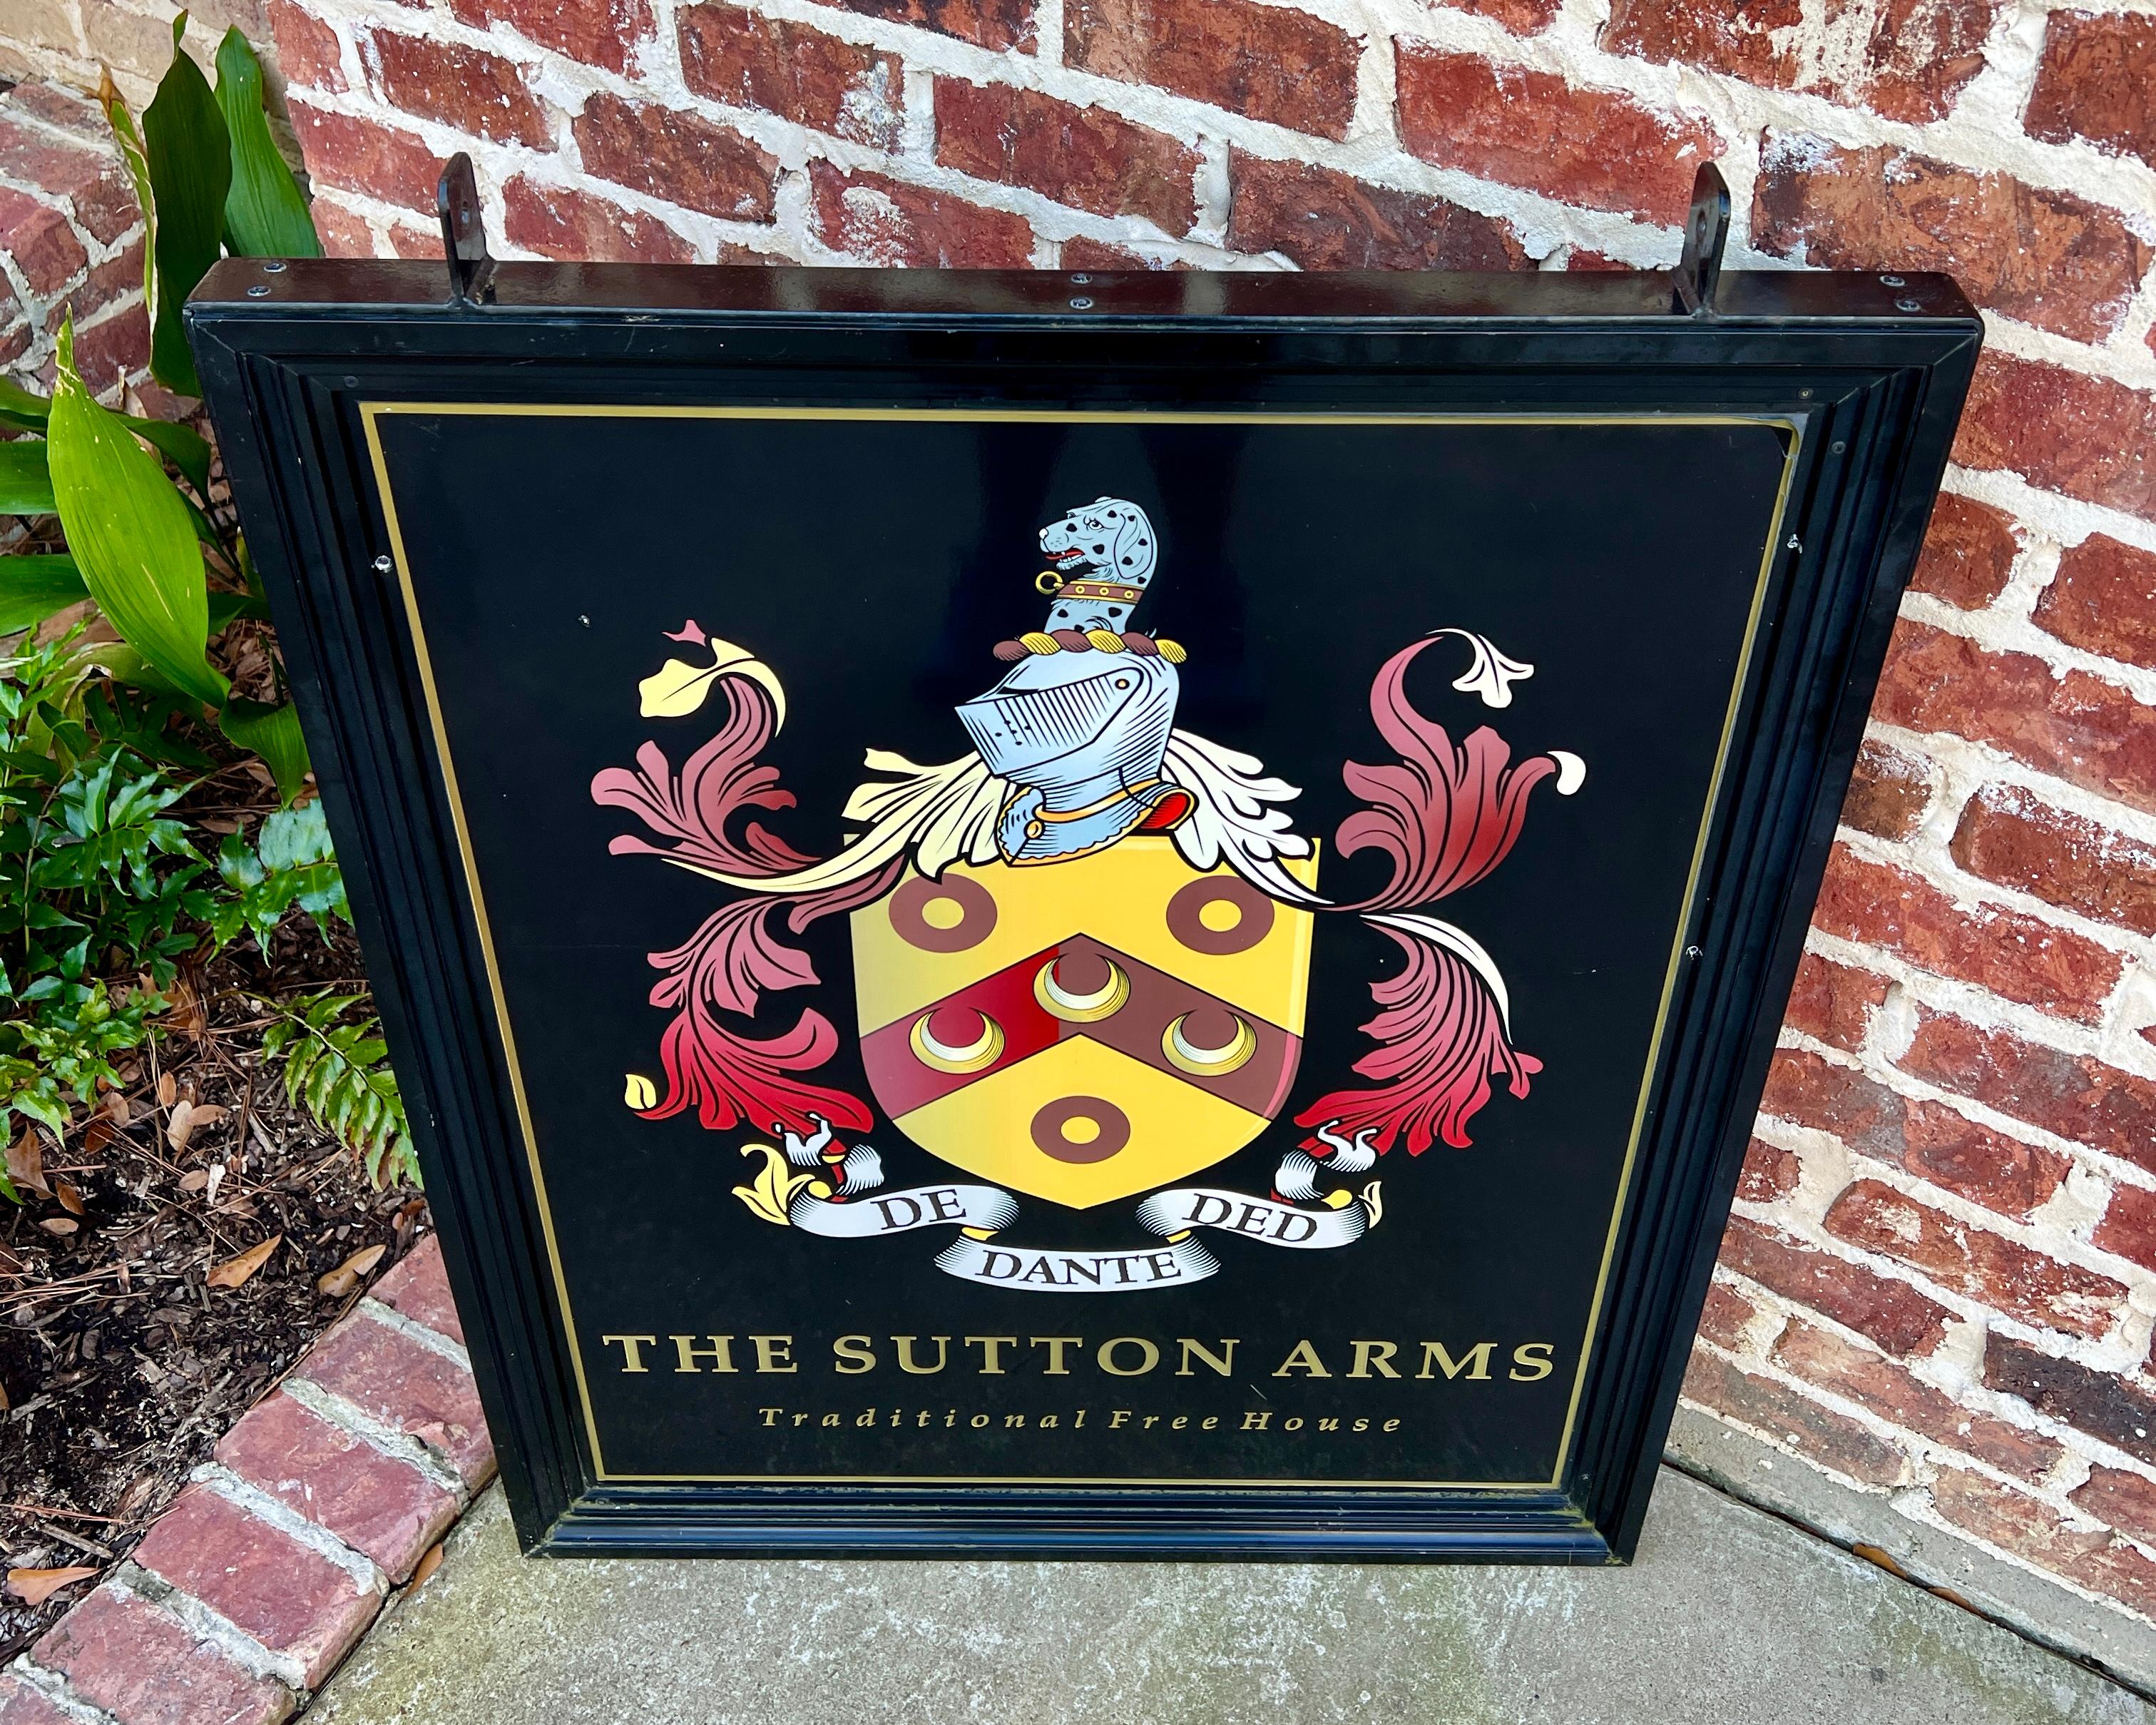 Vintage English Pub Sign Metal Double Sided Sutton Arms Traditional Free House For Sale 5